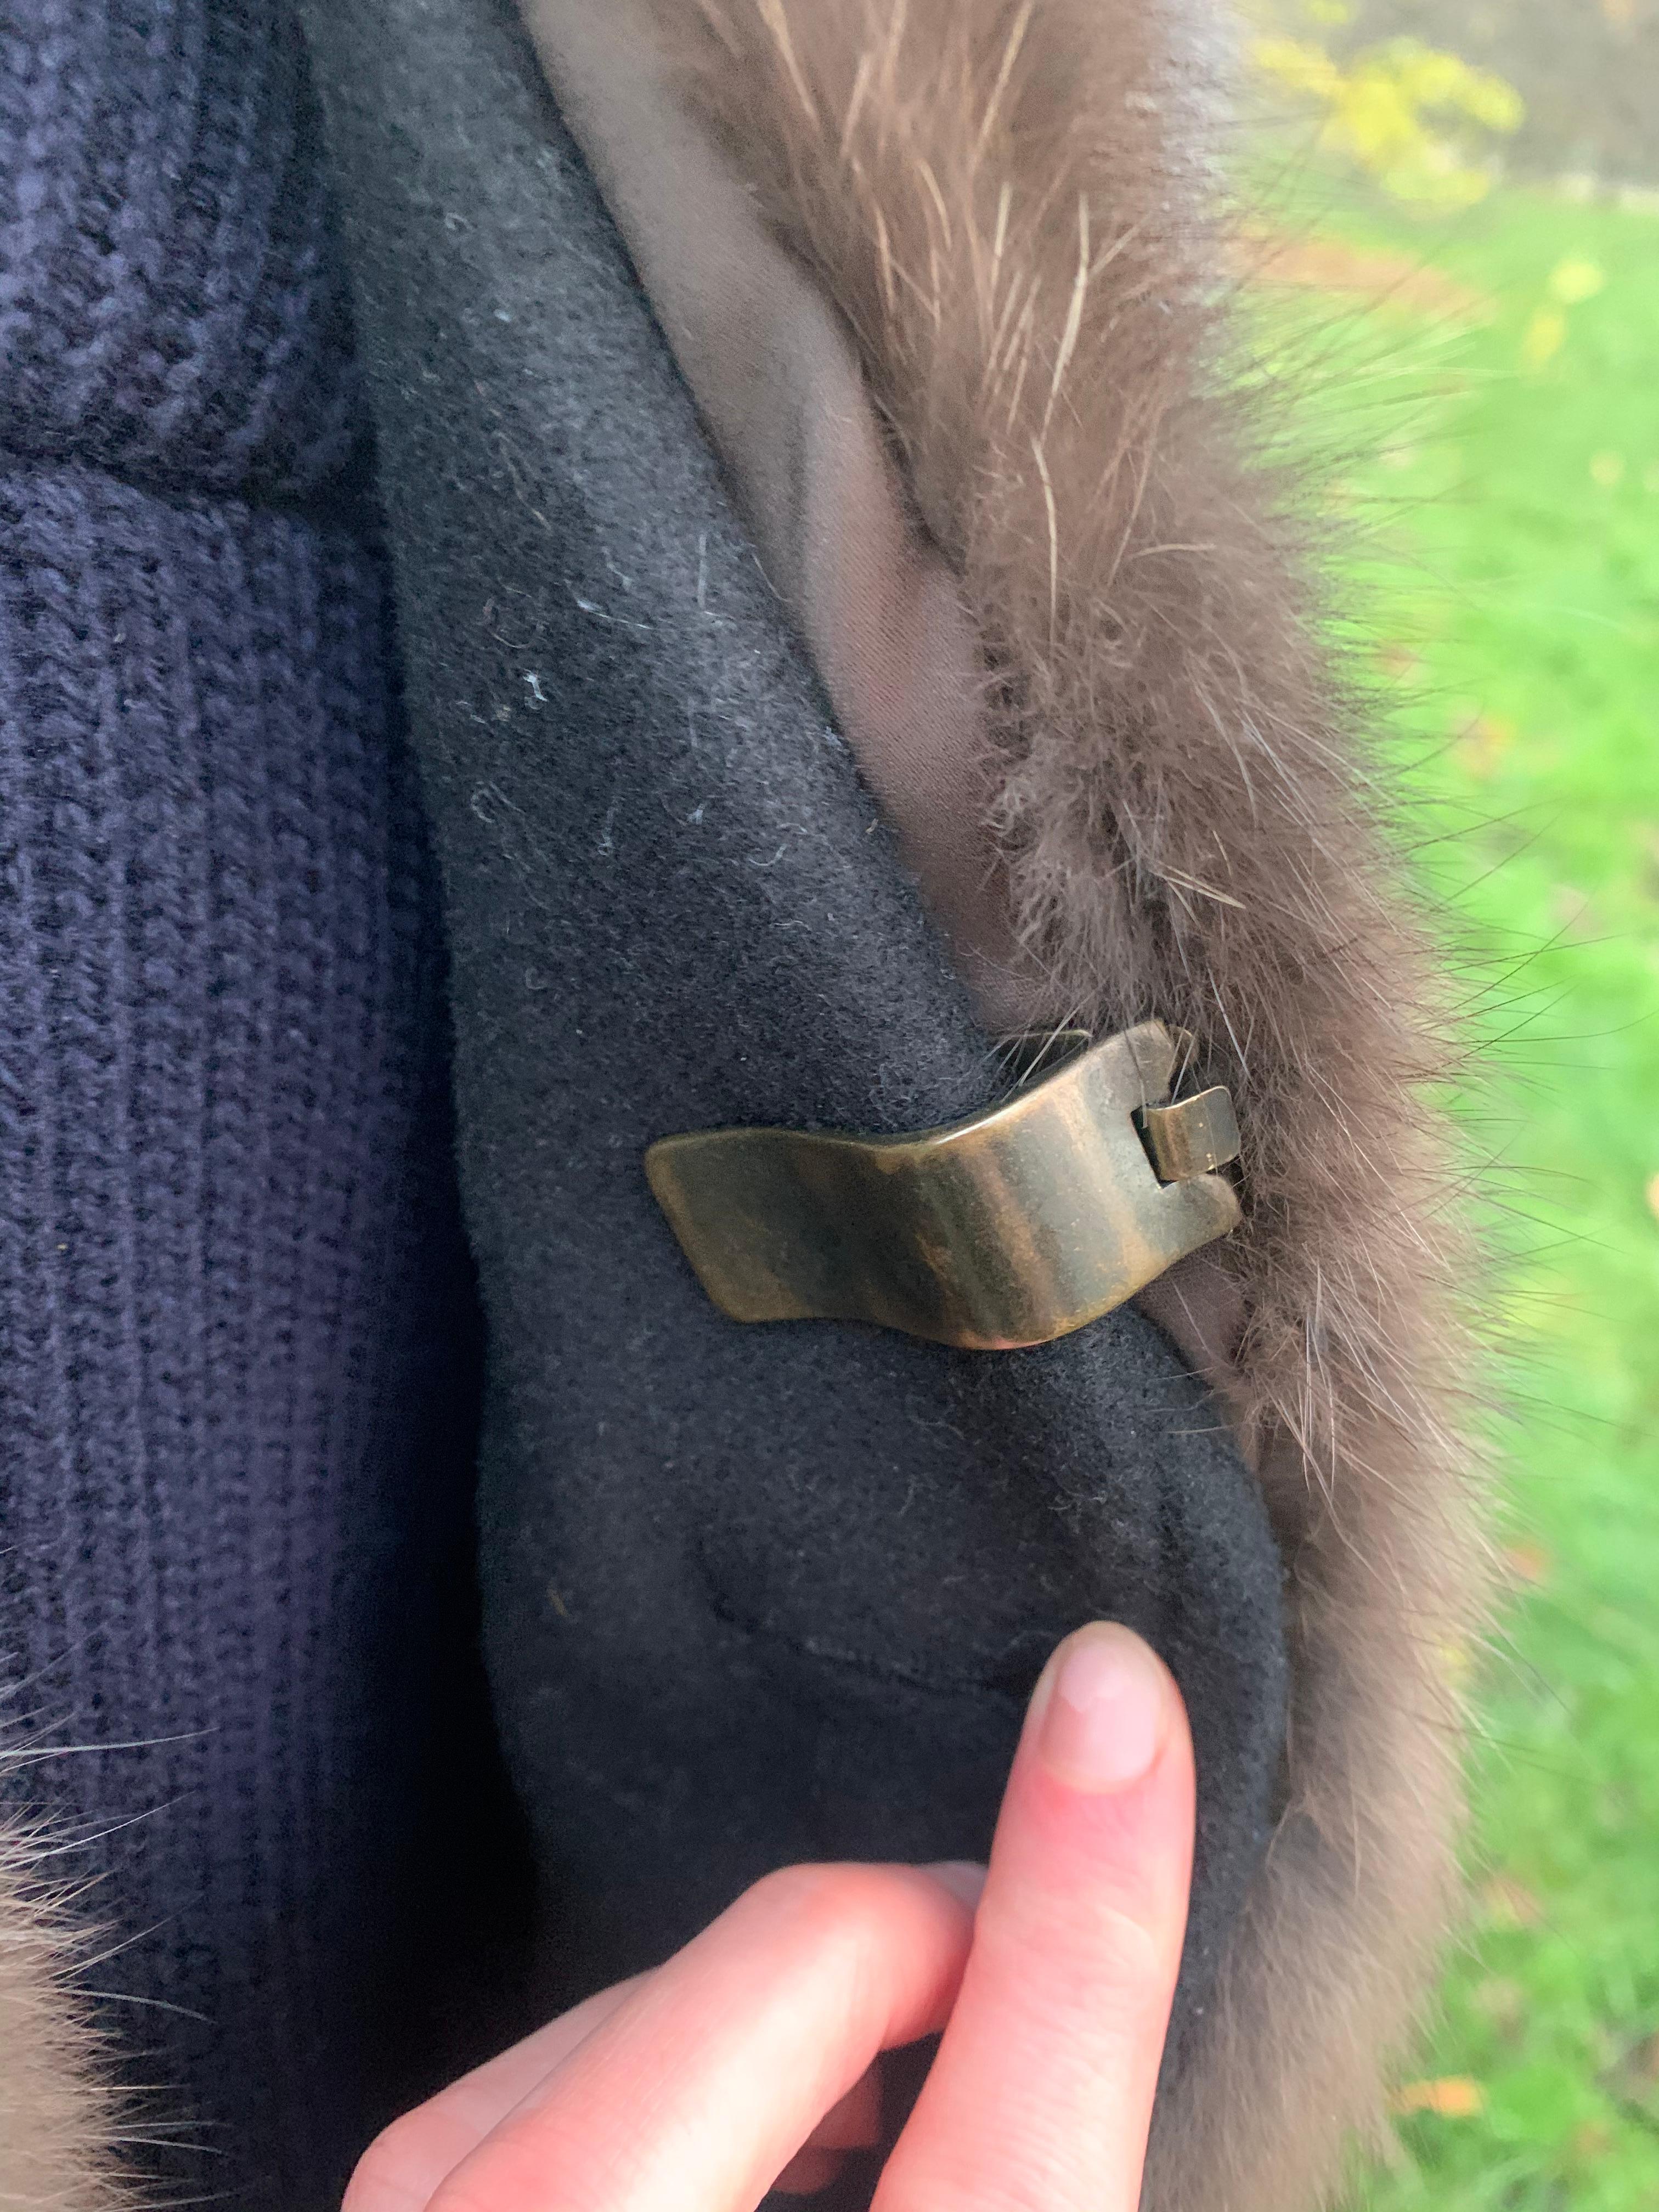 Verheyen London Mens Detachable Russian Barguzin Sable Fur Collar 

PRODUCT DETAILS

Verheyen London’s mens detachable fur collar is our classic staple for effortless style for casual wear. To throw over your favourite knit or leather